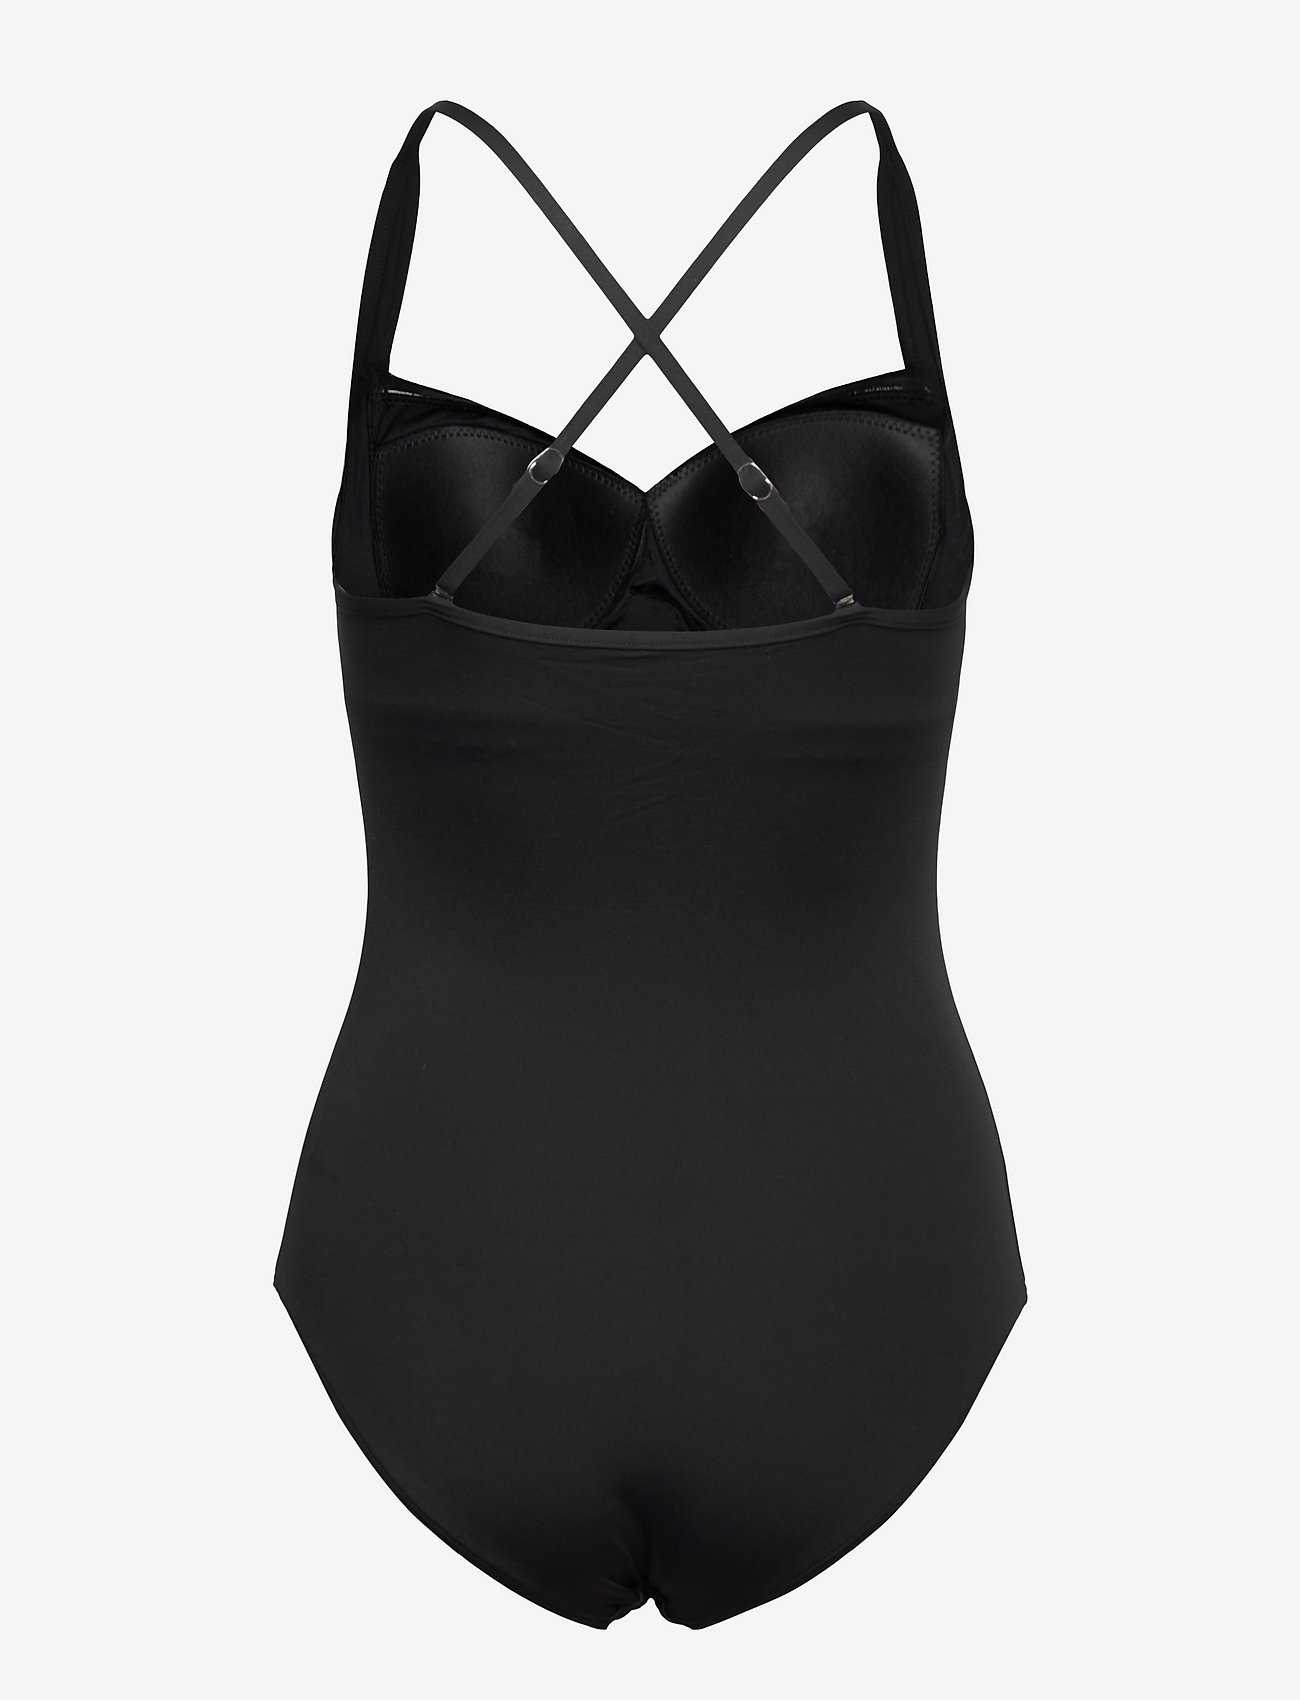 Seafolly - Seafolly Collective Twist Halter One Piece - badedrakter - black - 1